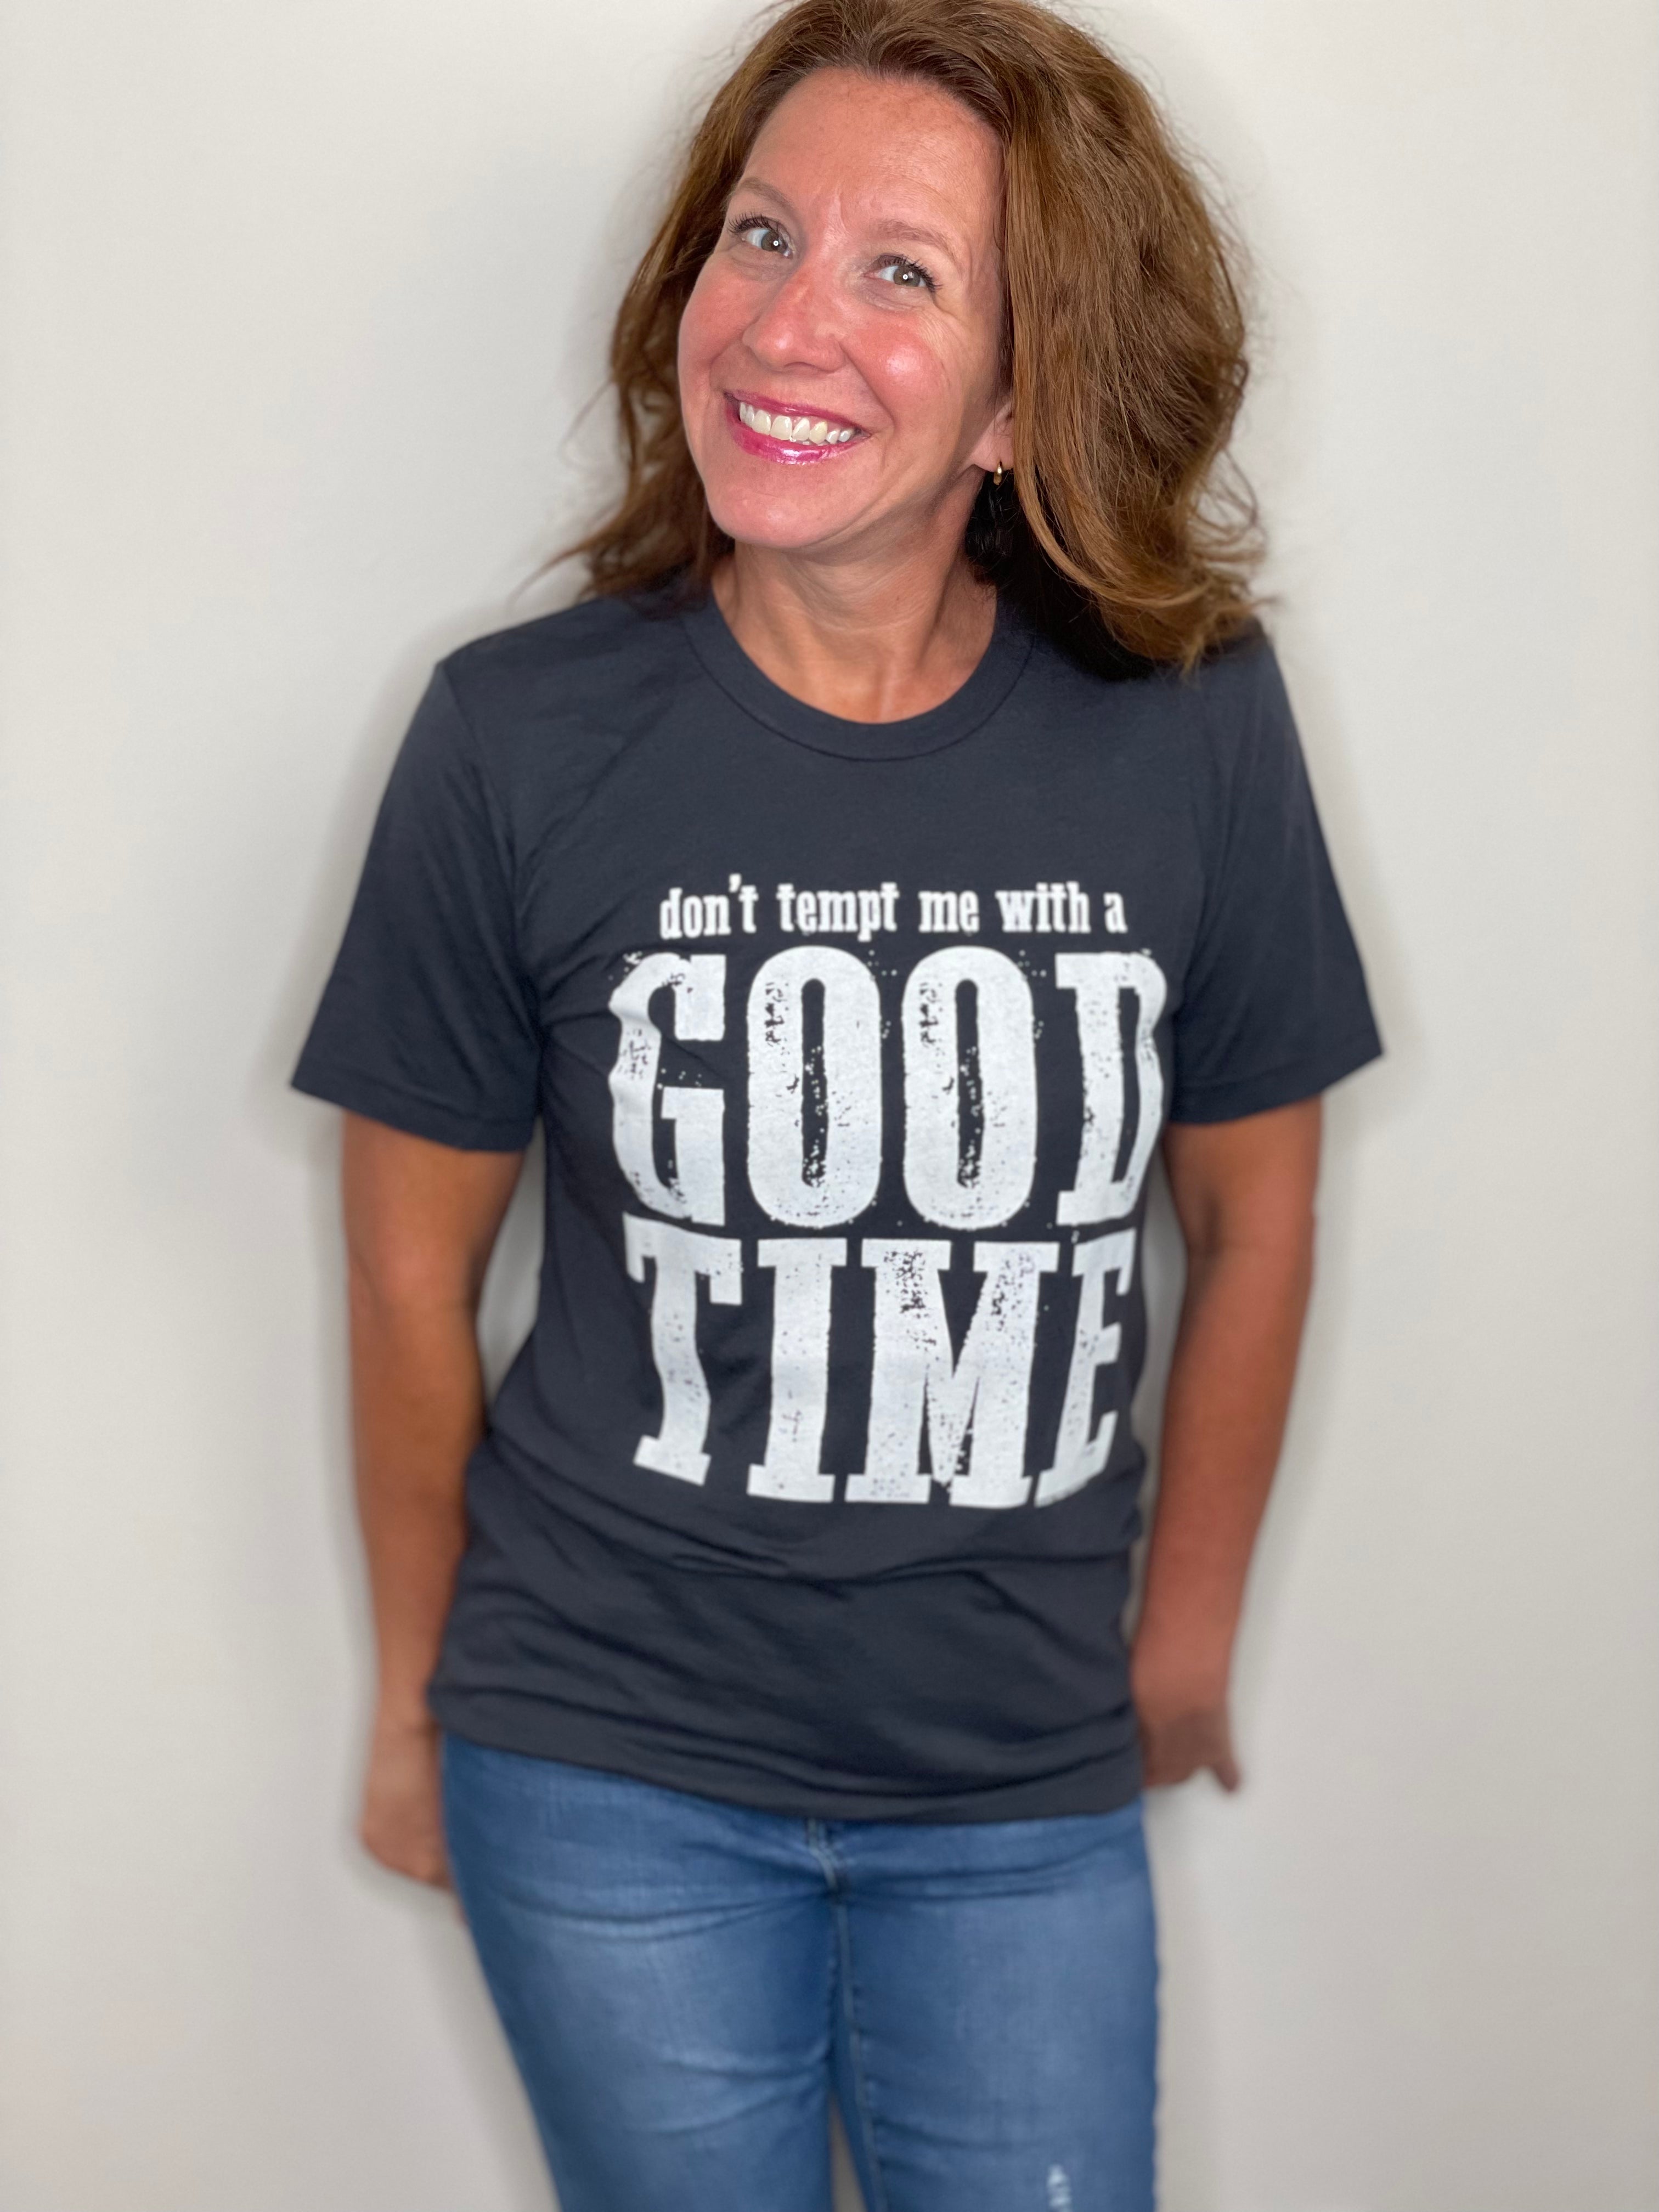 Don’t Tempt Me With a Good Time T Shirt.